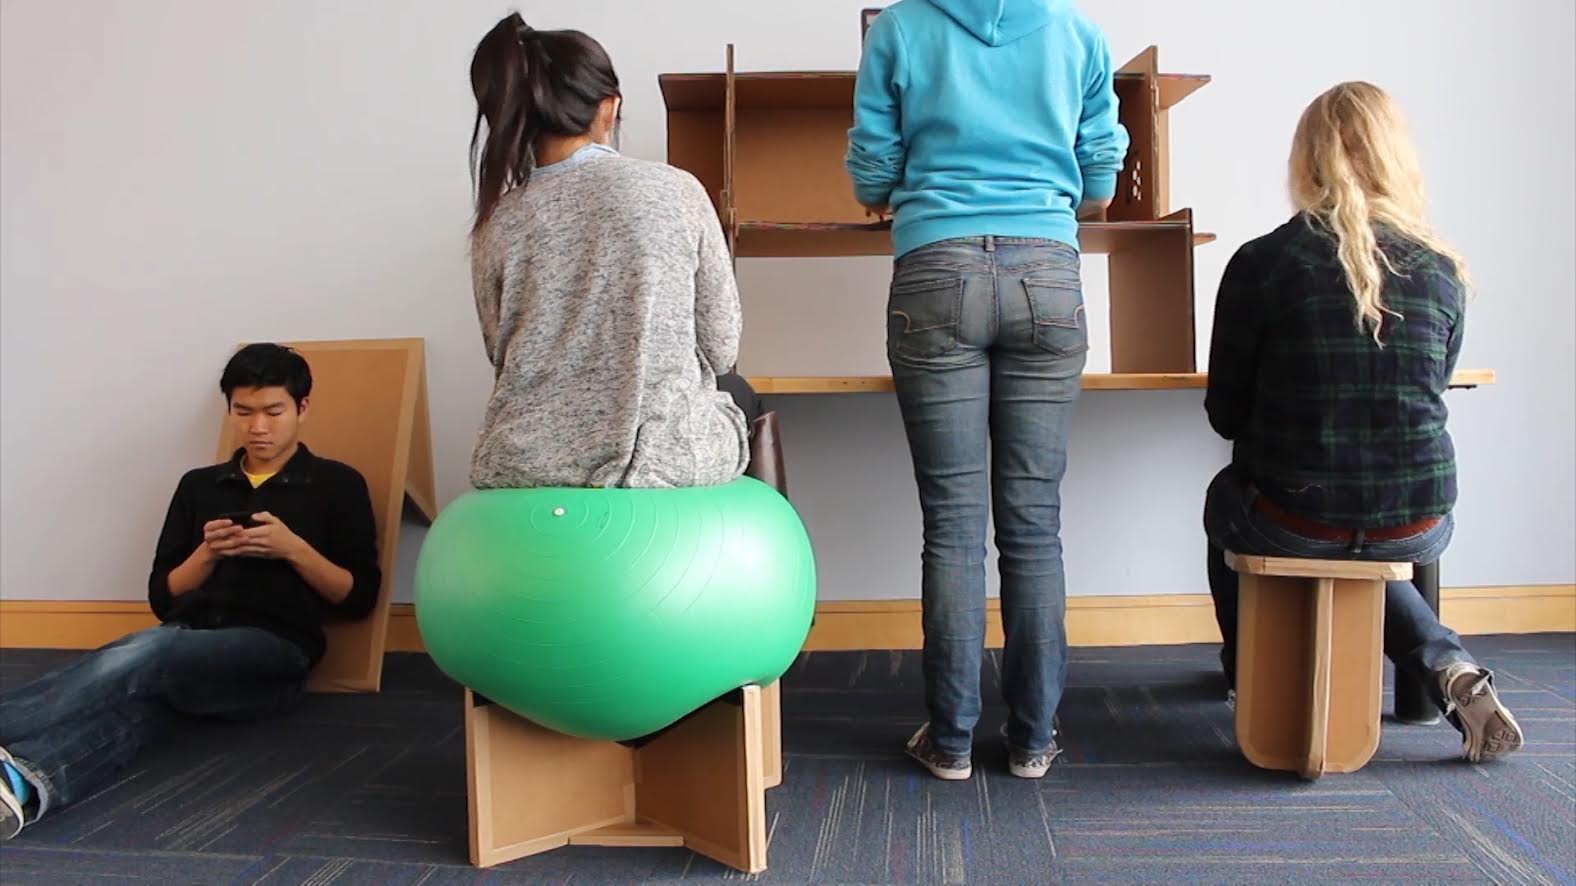 a still from a student video advertising the work of the Adaptive Design Association: four students use cardboard furniture and adaptations for study